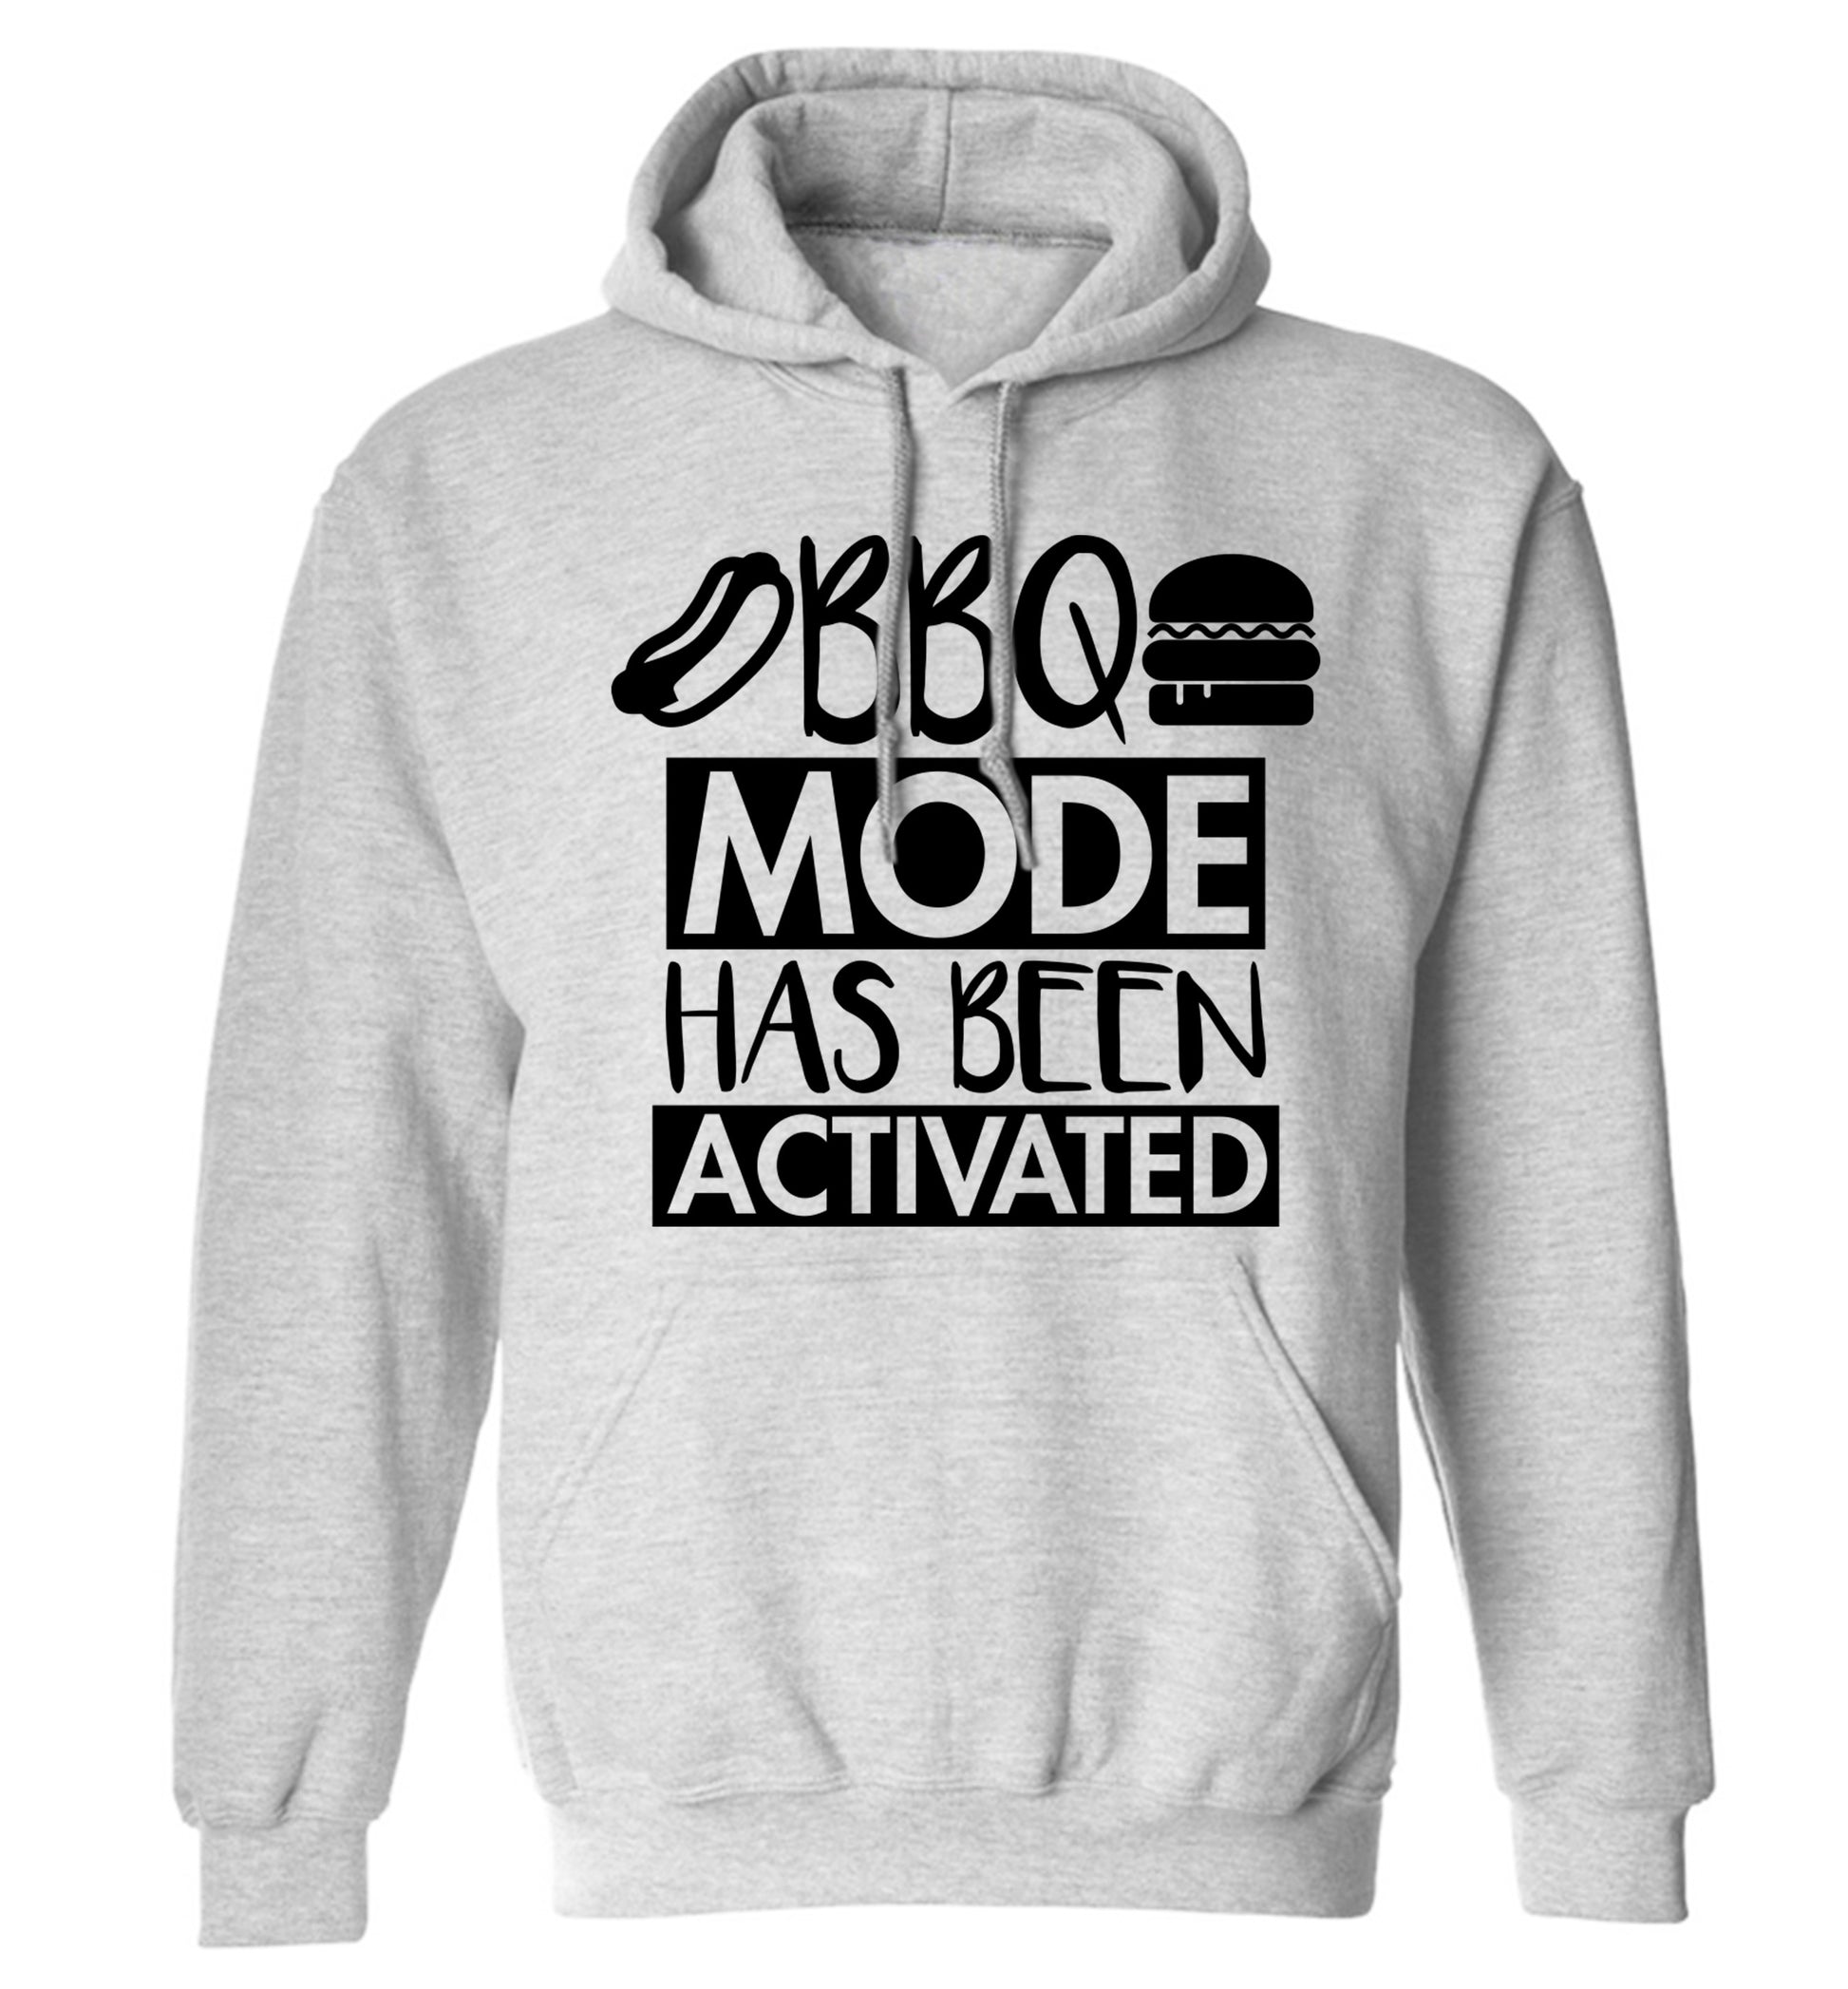 Bbq mode has been activated adults unisex grey hoodie 2XL